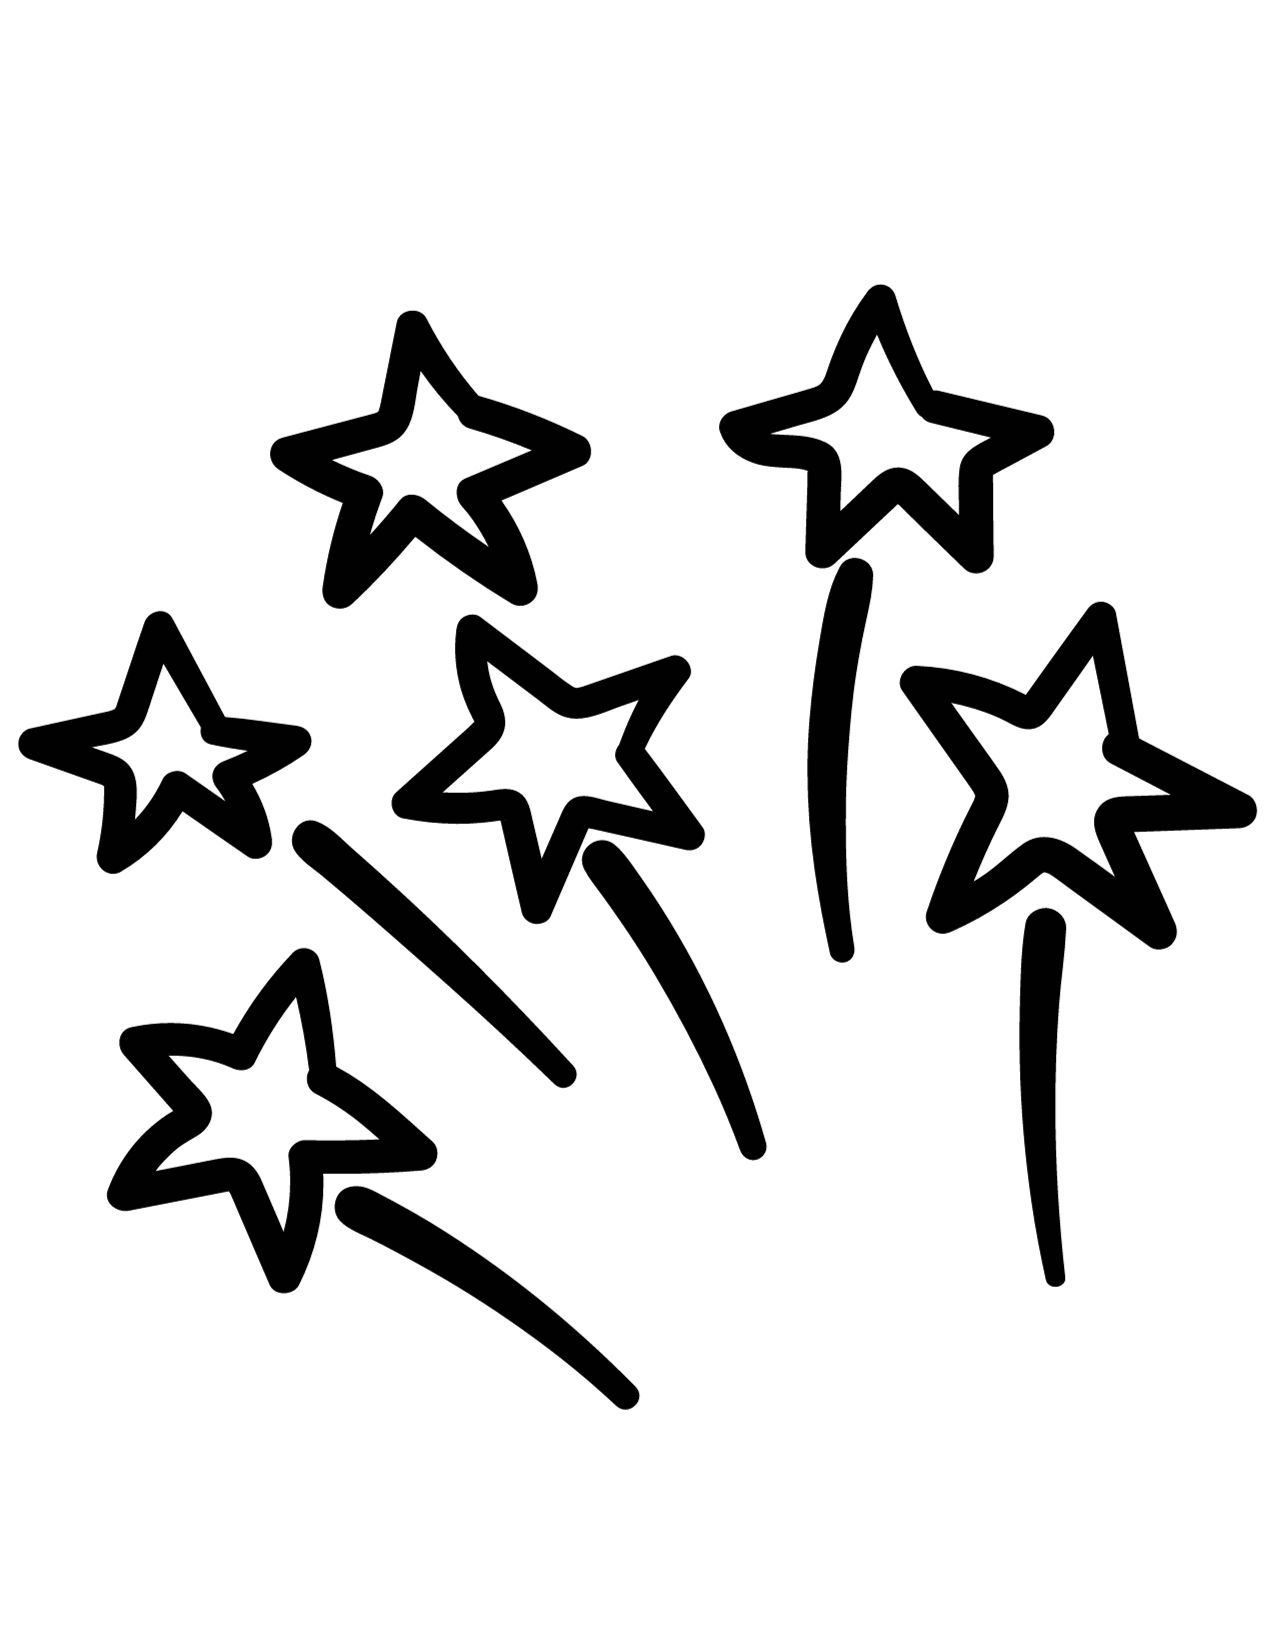 Twinkling star coloring pages for kids and adults